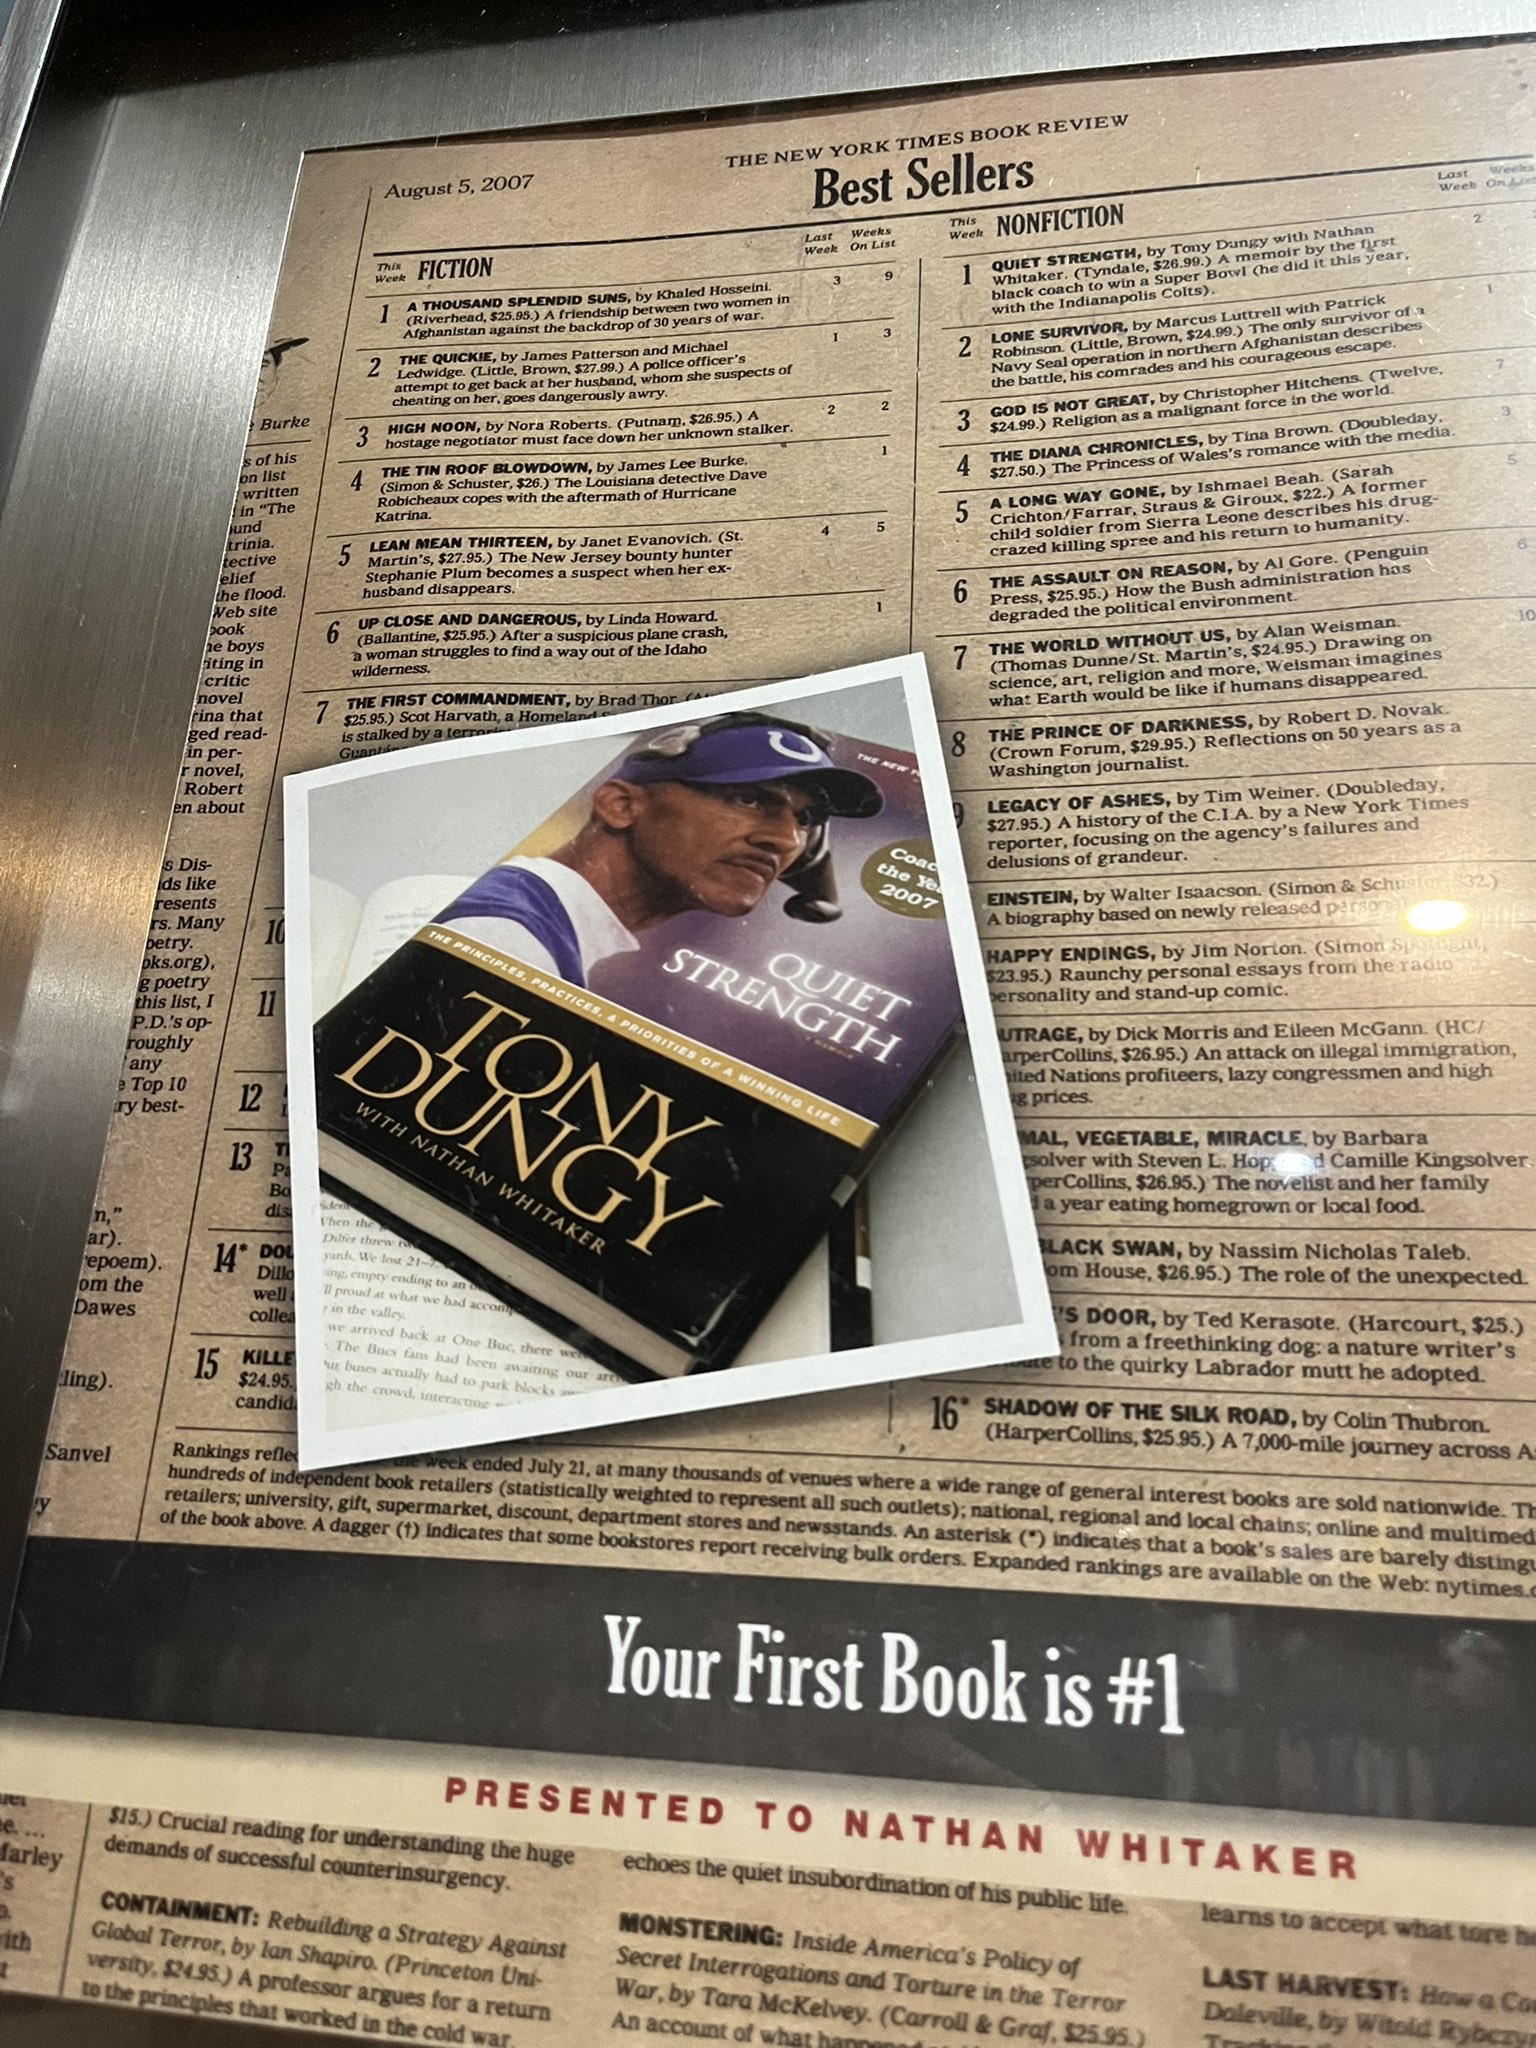 Tony Dungy on X: This has been so gratifying. Big thank you to  @NathanWhitaker for convincing me to join him on this project. So many  people have said this book has helped